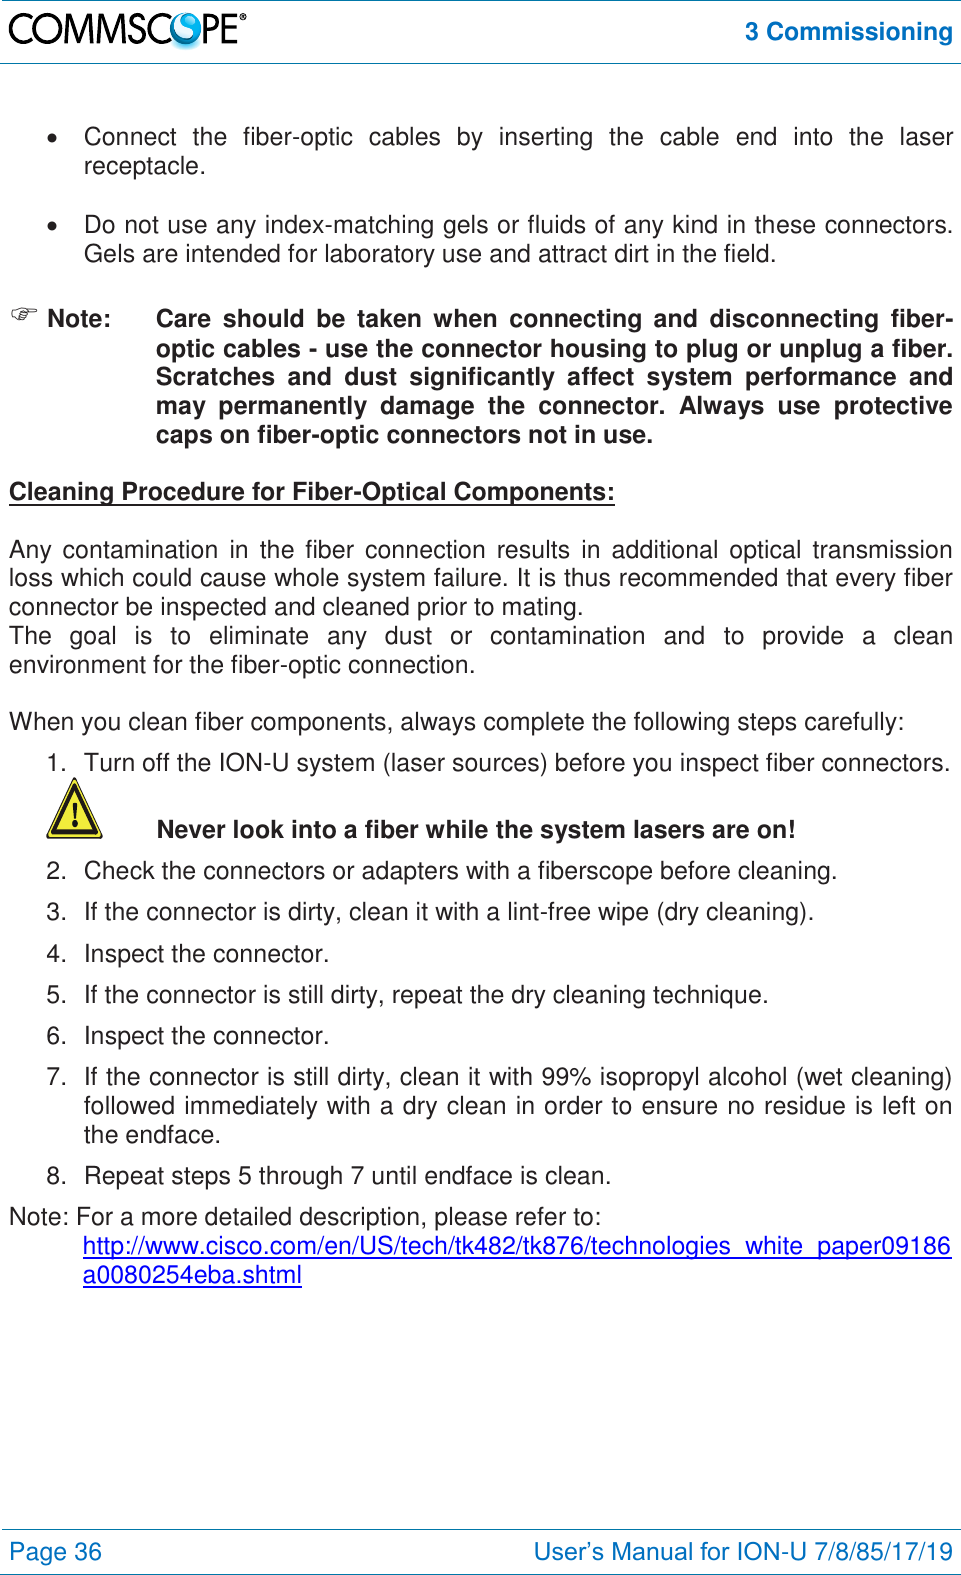  3 Commissioning  Page 36 User’s Manual for ION-U 7/8/85/17/19     Connect  the  fiber-optic  cables  by  inserting  the  cable  end  into  the  laser receptacle.    Do not use any index-matching gels or fluids of any kind in these connectors. Gels are intended for laboratory use and attract dirt in the field.   Note:  Care  should  be  taken when  connecting  and  disconnecting  fiber-optic cables - use the connector housing to plug or unplug a fiber. Scratches  and  dust  significantly  affect  system  performance  and may  permanently  damage  the  connector.  Always  use  protective caps on fiber-optic connectors not in use.  Cleaning Procedure for Fiber-Optical Components:  Any  contamination  in  the  fiber  connection  results  in  additional  optical  transmission loss which could cause whole system failure. It is thus recommended that every fiber connector be inspected and cleaned prior to mating. The  goal  is  to  eliminate  any  dust  or  contamination  and  to  provide  a  clean environment for the fiber-optic connection.   When you clean fiber components, always complete the following steps carefully: 1.  Turn off the ION-U system (laser sources) before you inspect fiber connectors.  Never look into a fiber while the system lasers are on! 2.  Check the connectors or adapters with a fiberscope before cleaning. 3.  If the connector is dirty, clean it with a lint-free wipe (dry cleaning). 4.  Inspect the connector. 5.  If the connector is still dirty, repeat the dry cleaning technique. 6.  Inspect the connector. 7.  If the connector is still dirty, clean it with 99% isopropyl alcohol (wet cleaning) followed immediately with a dry clean in order to ensure no residue is left on the endface. 8.  Repeat steps 5 through 7 until endface is clean. Note: For a more detailed description, please refer to:  http://www.cisco.com/en/US/tech/tk482/tk876/technologies_white_paper09186a0080254eba.shtml  